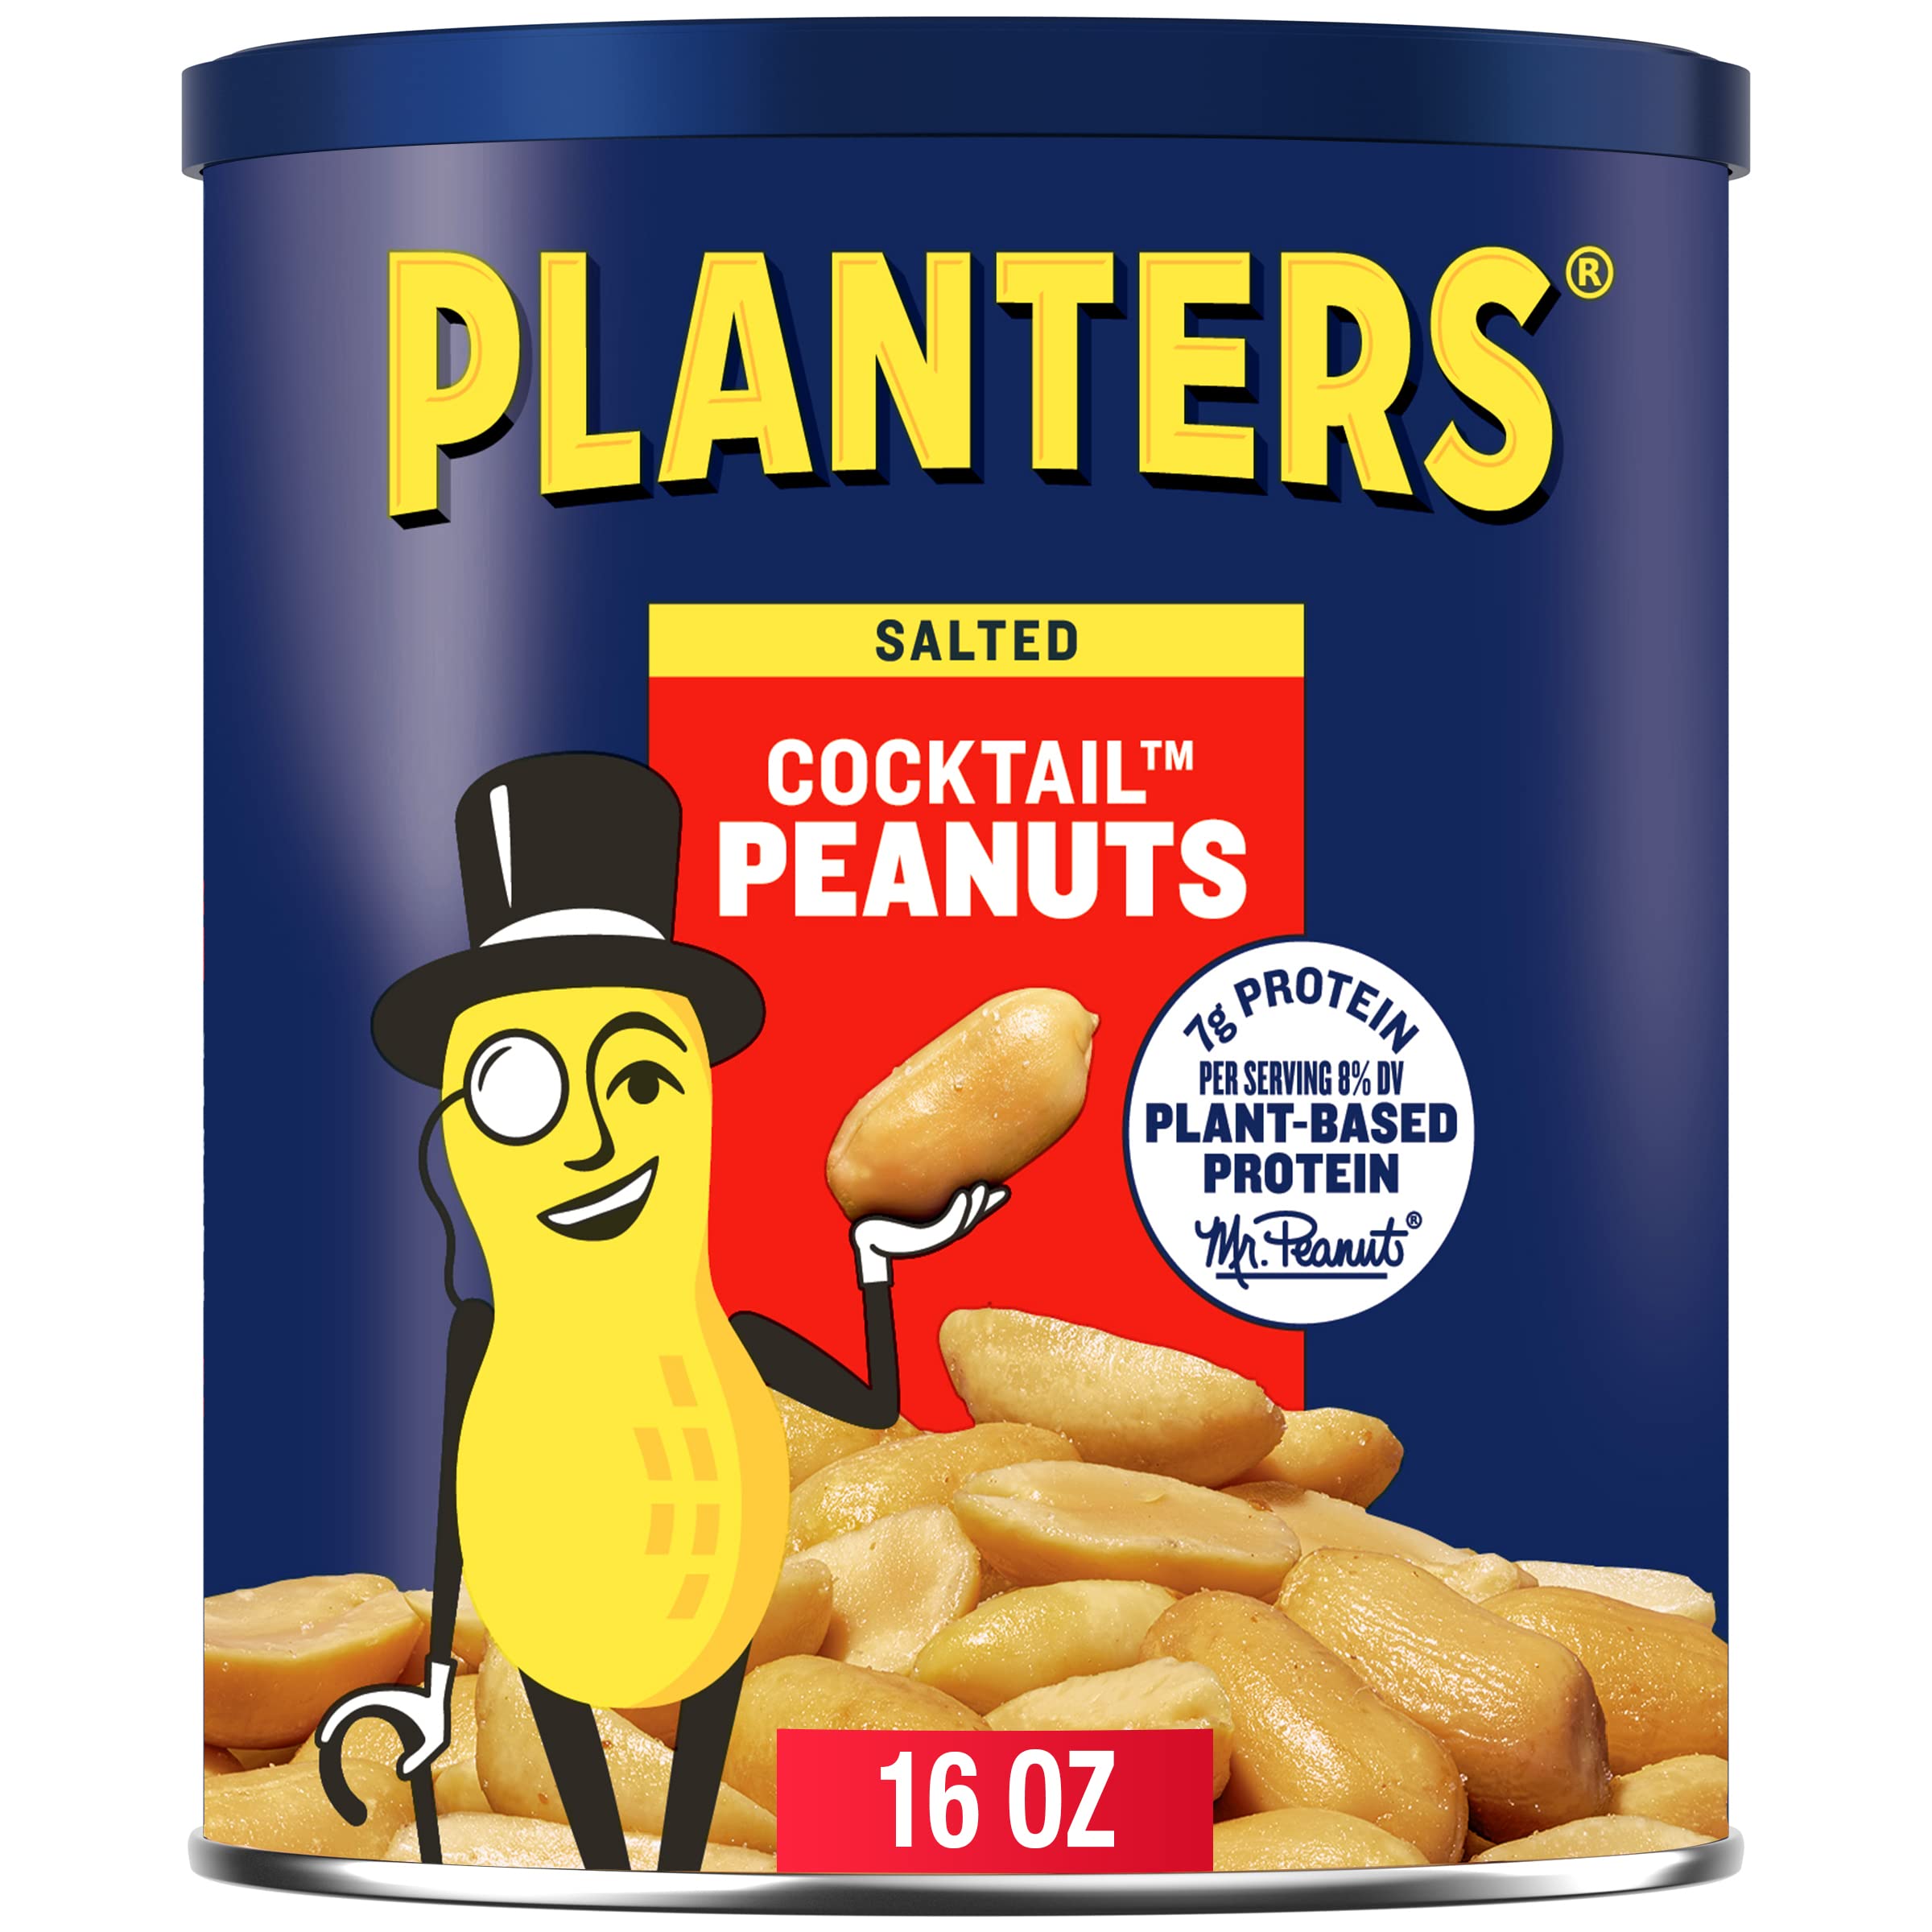 16oz Planters Salted Cocktail Peanuts for $1.69 - 1.89 w/ S&S +FS w/Prime or on $35+ $1.89